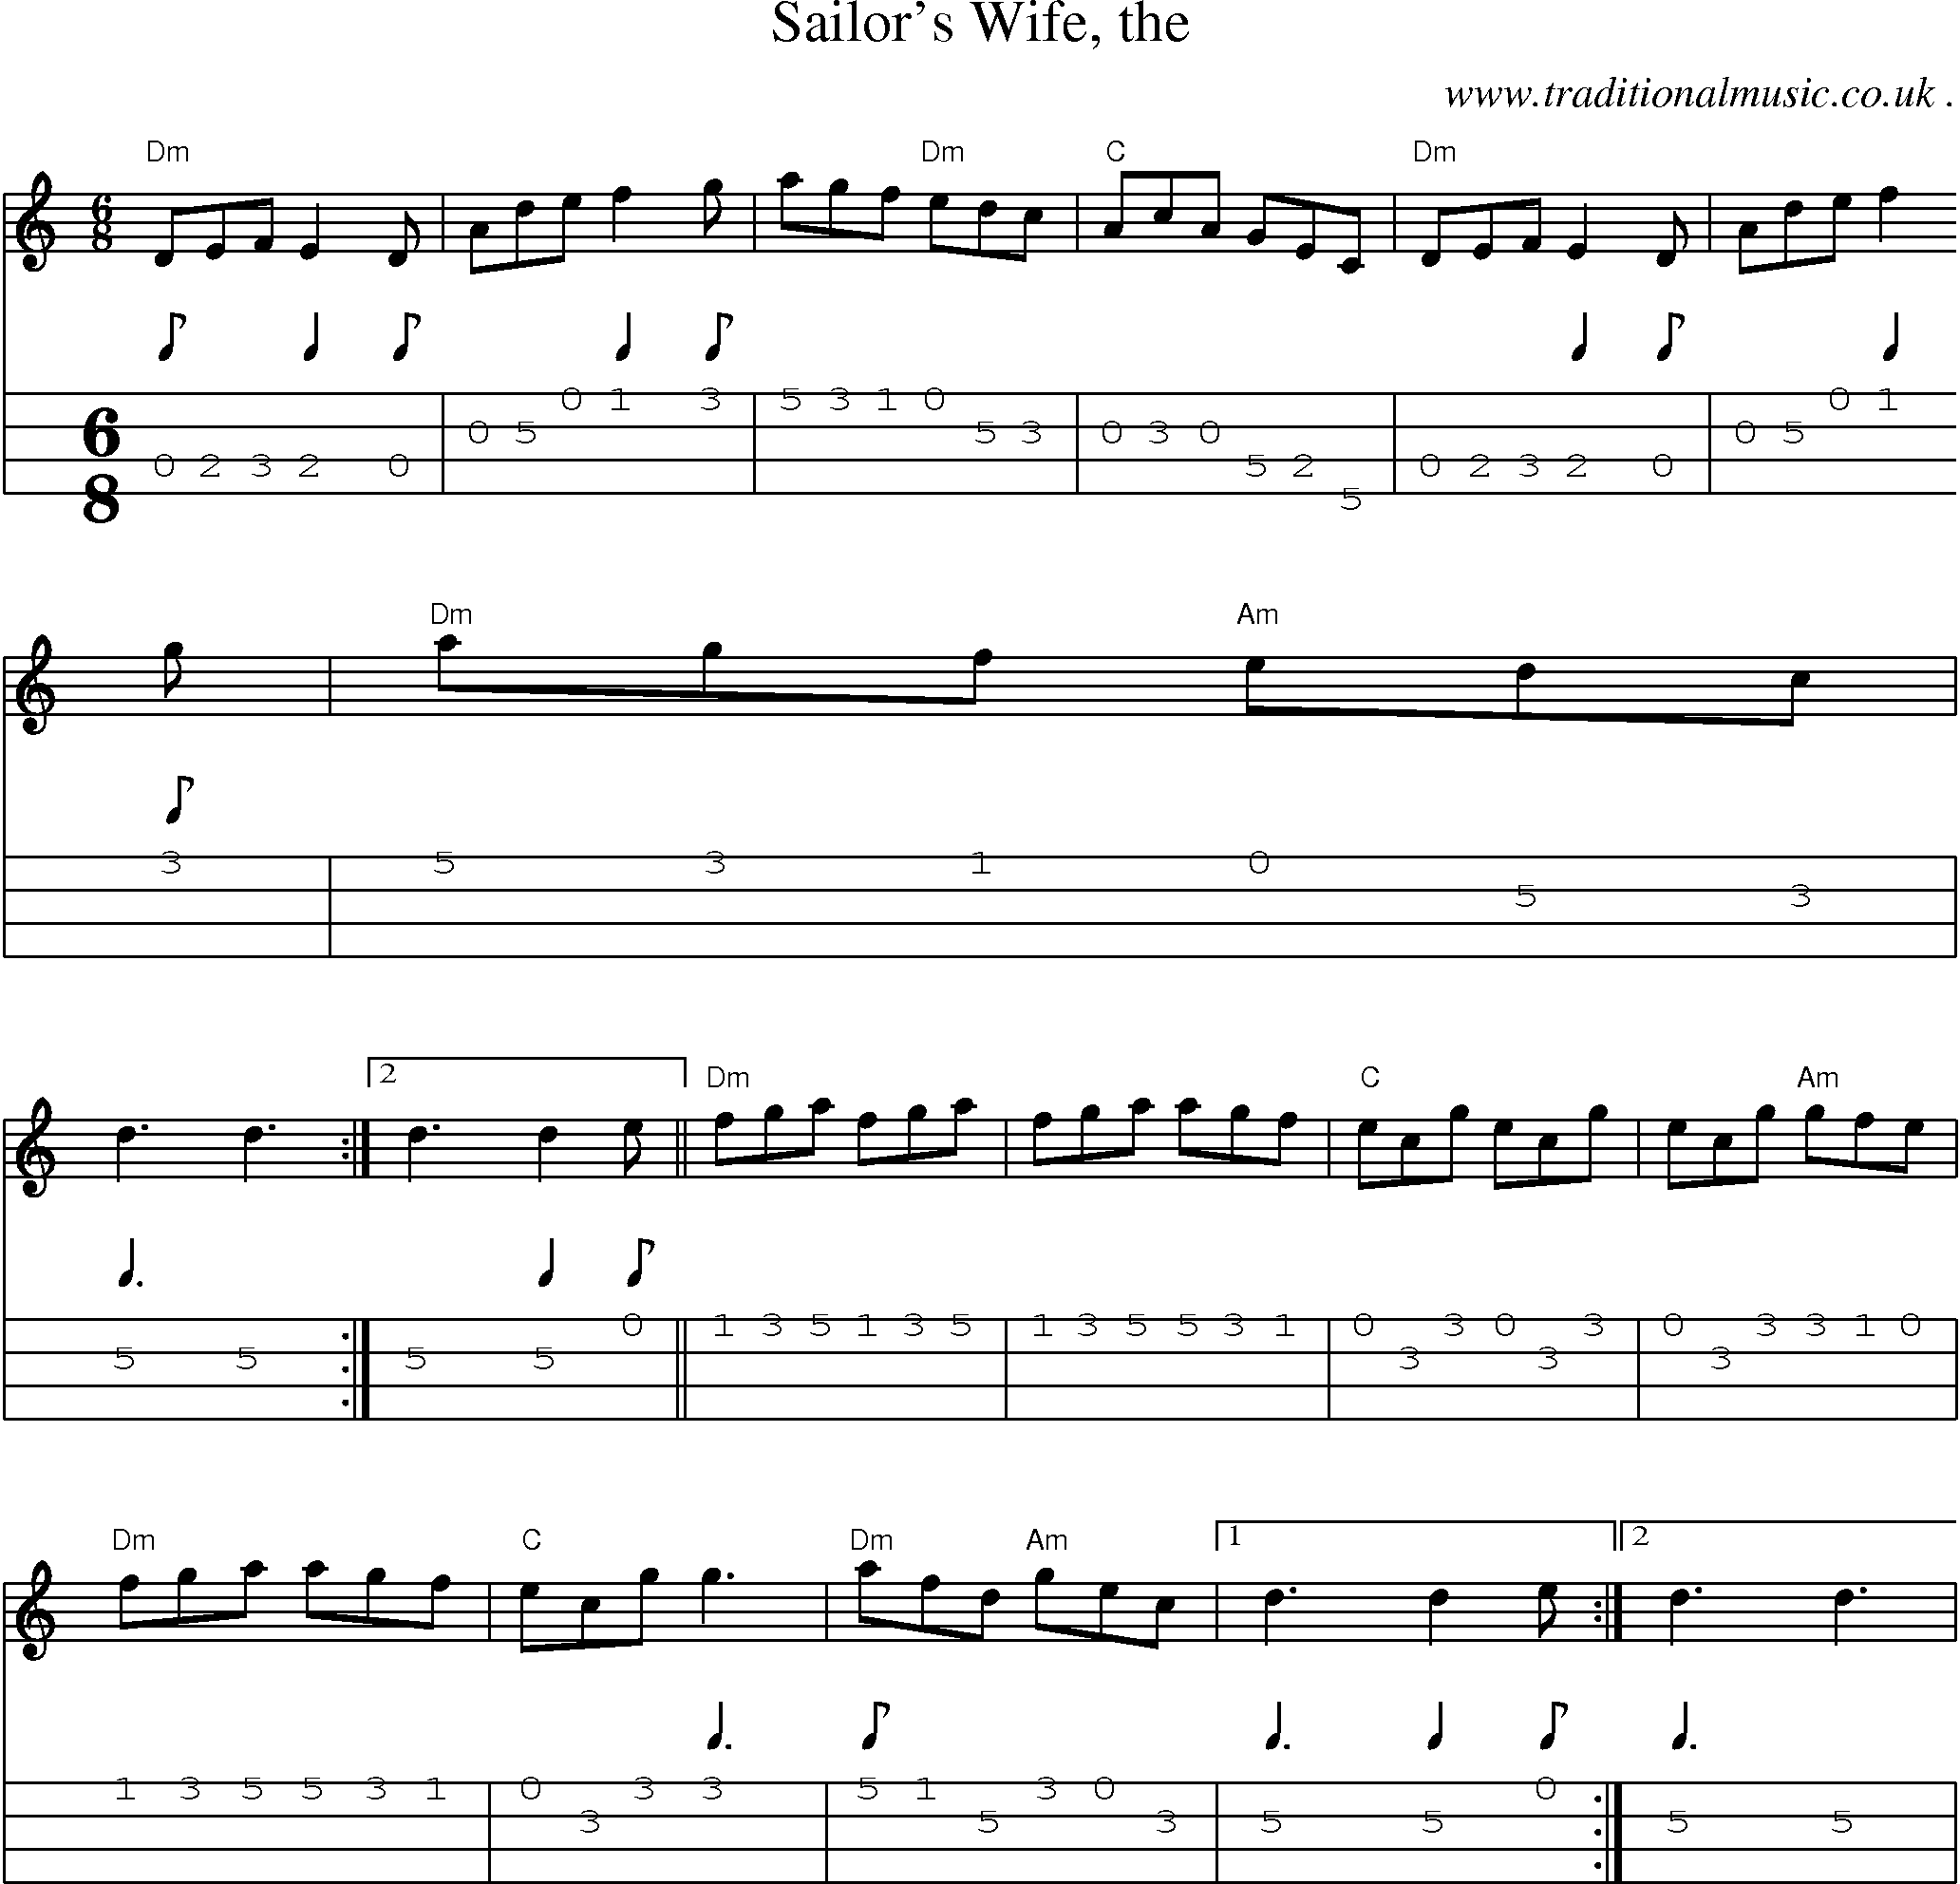 Music Score and Guitar Tabs for Sailors Wife The